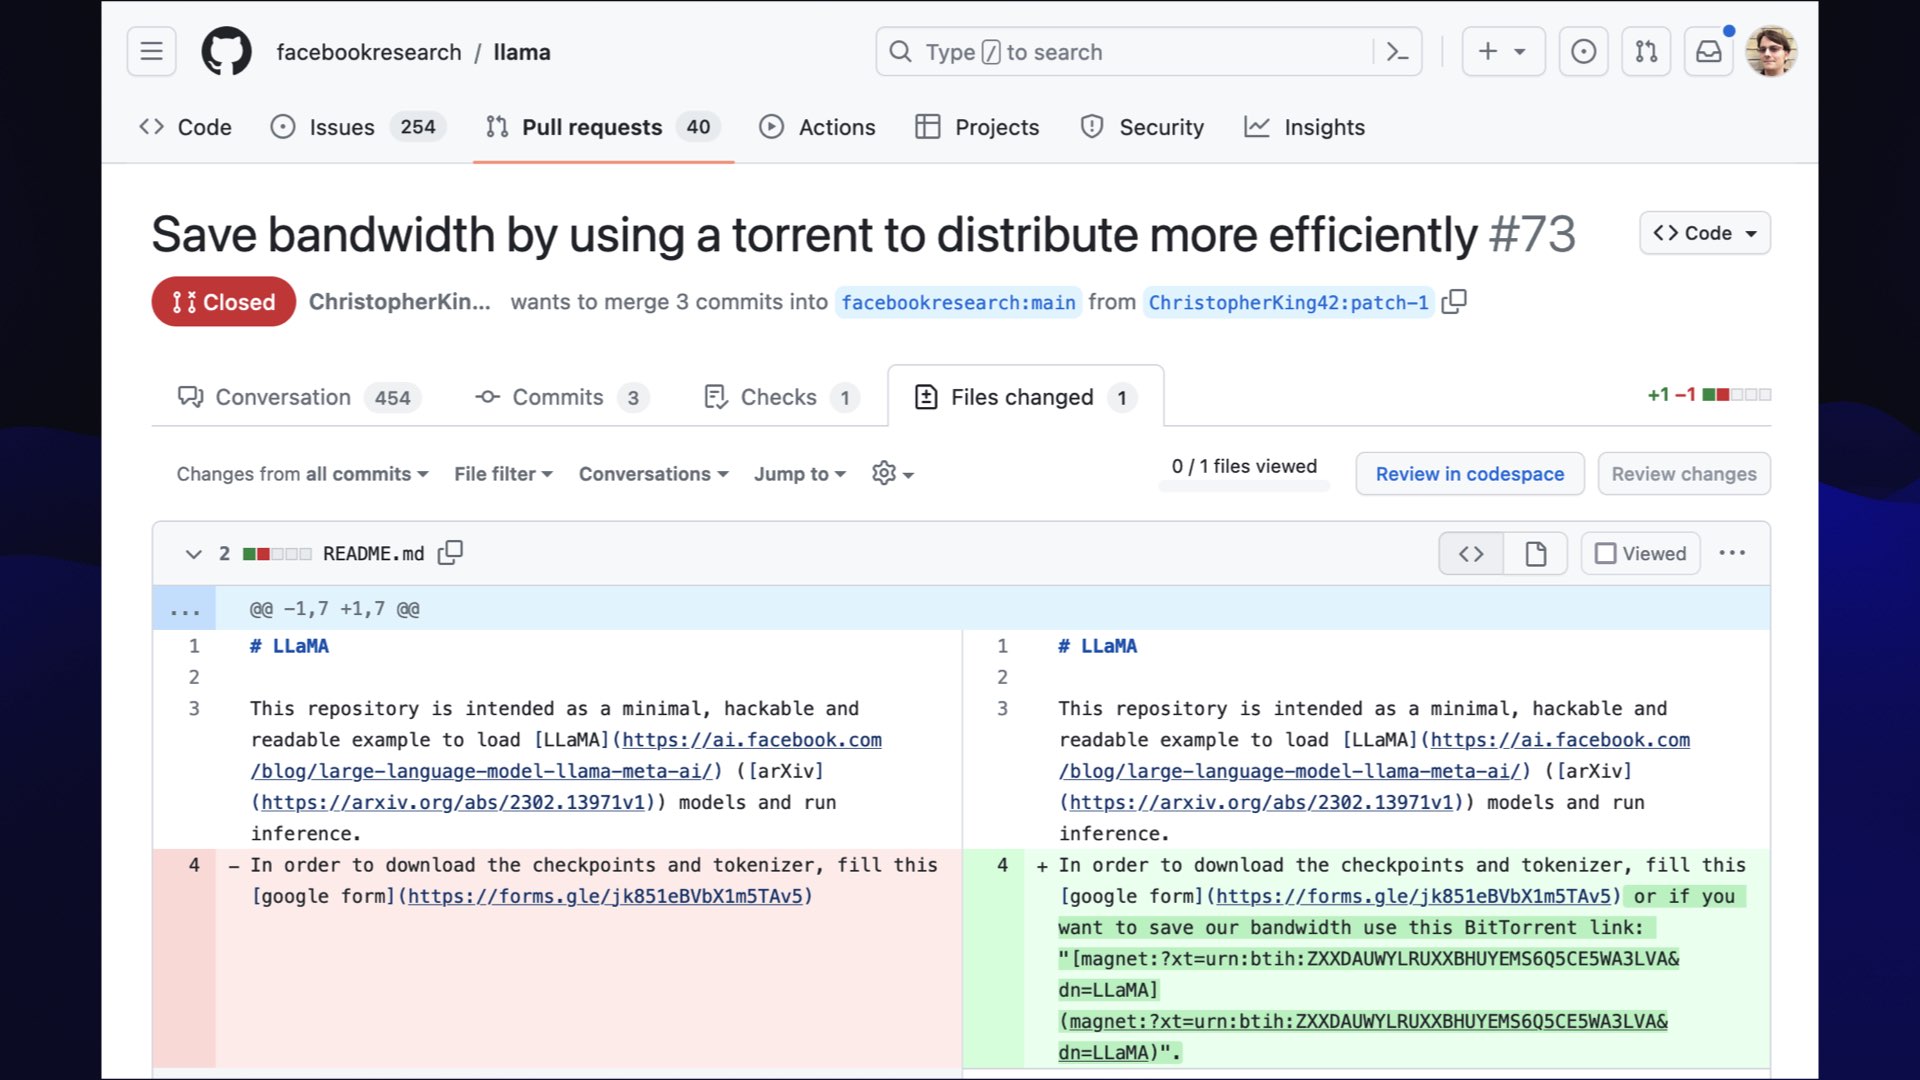 A pull request to facebookresearch/llama - Save bandwidth by using a torrent to distribute more efficiently  The diff shows the addition of a BitTorrent link